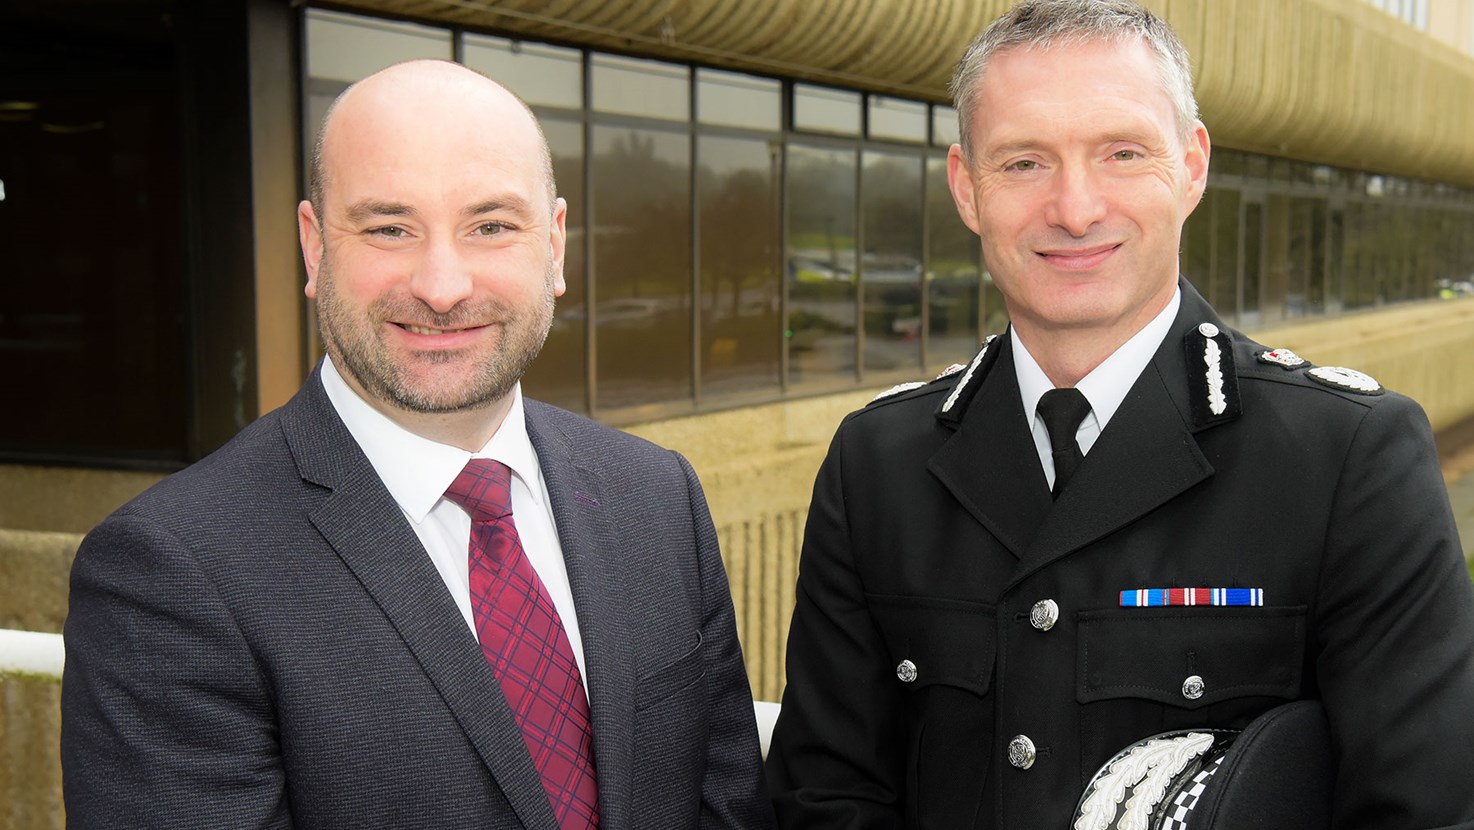 After 31 years in policing Mr Skelly announced he will step down from his role on December 18th this year.